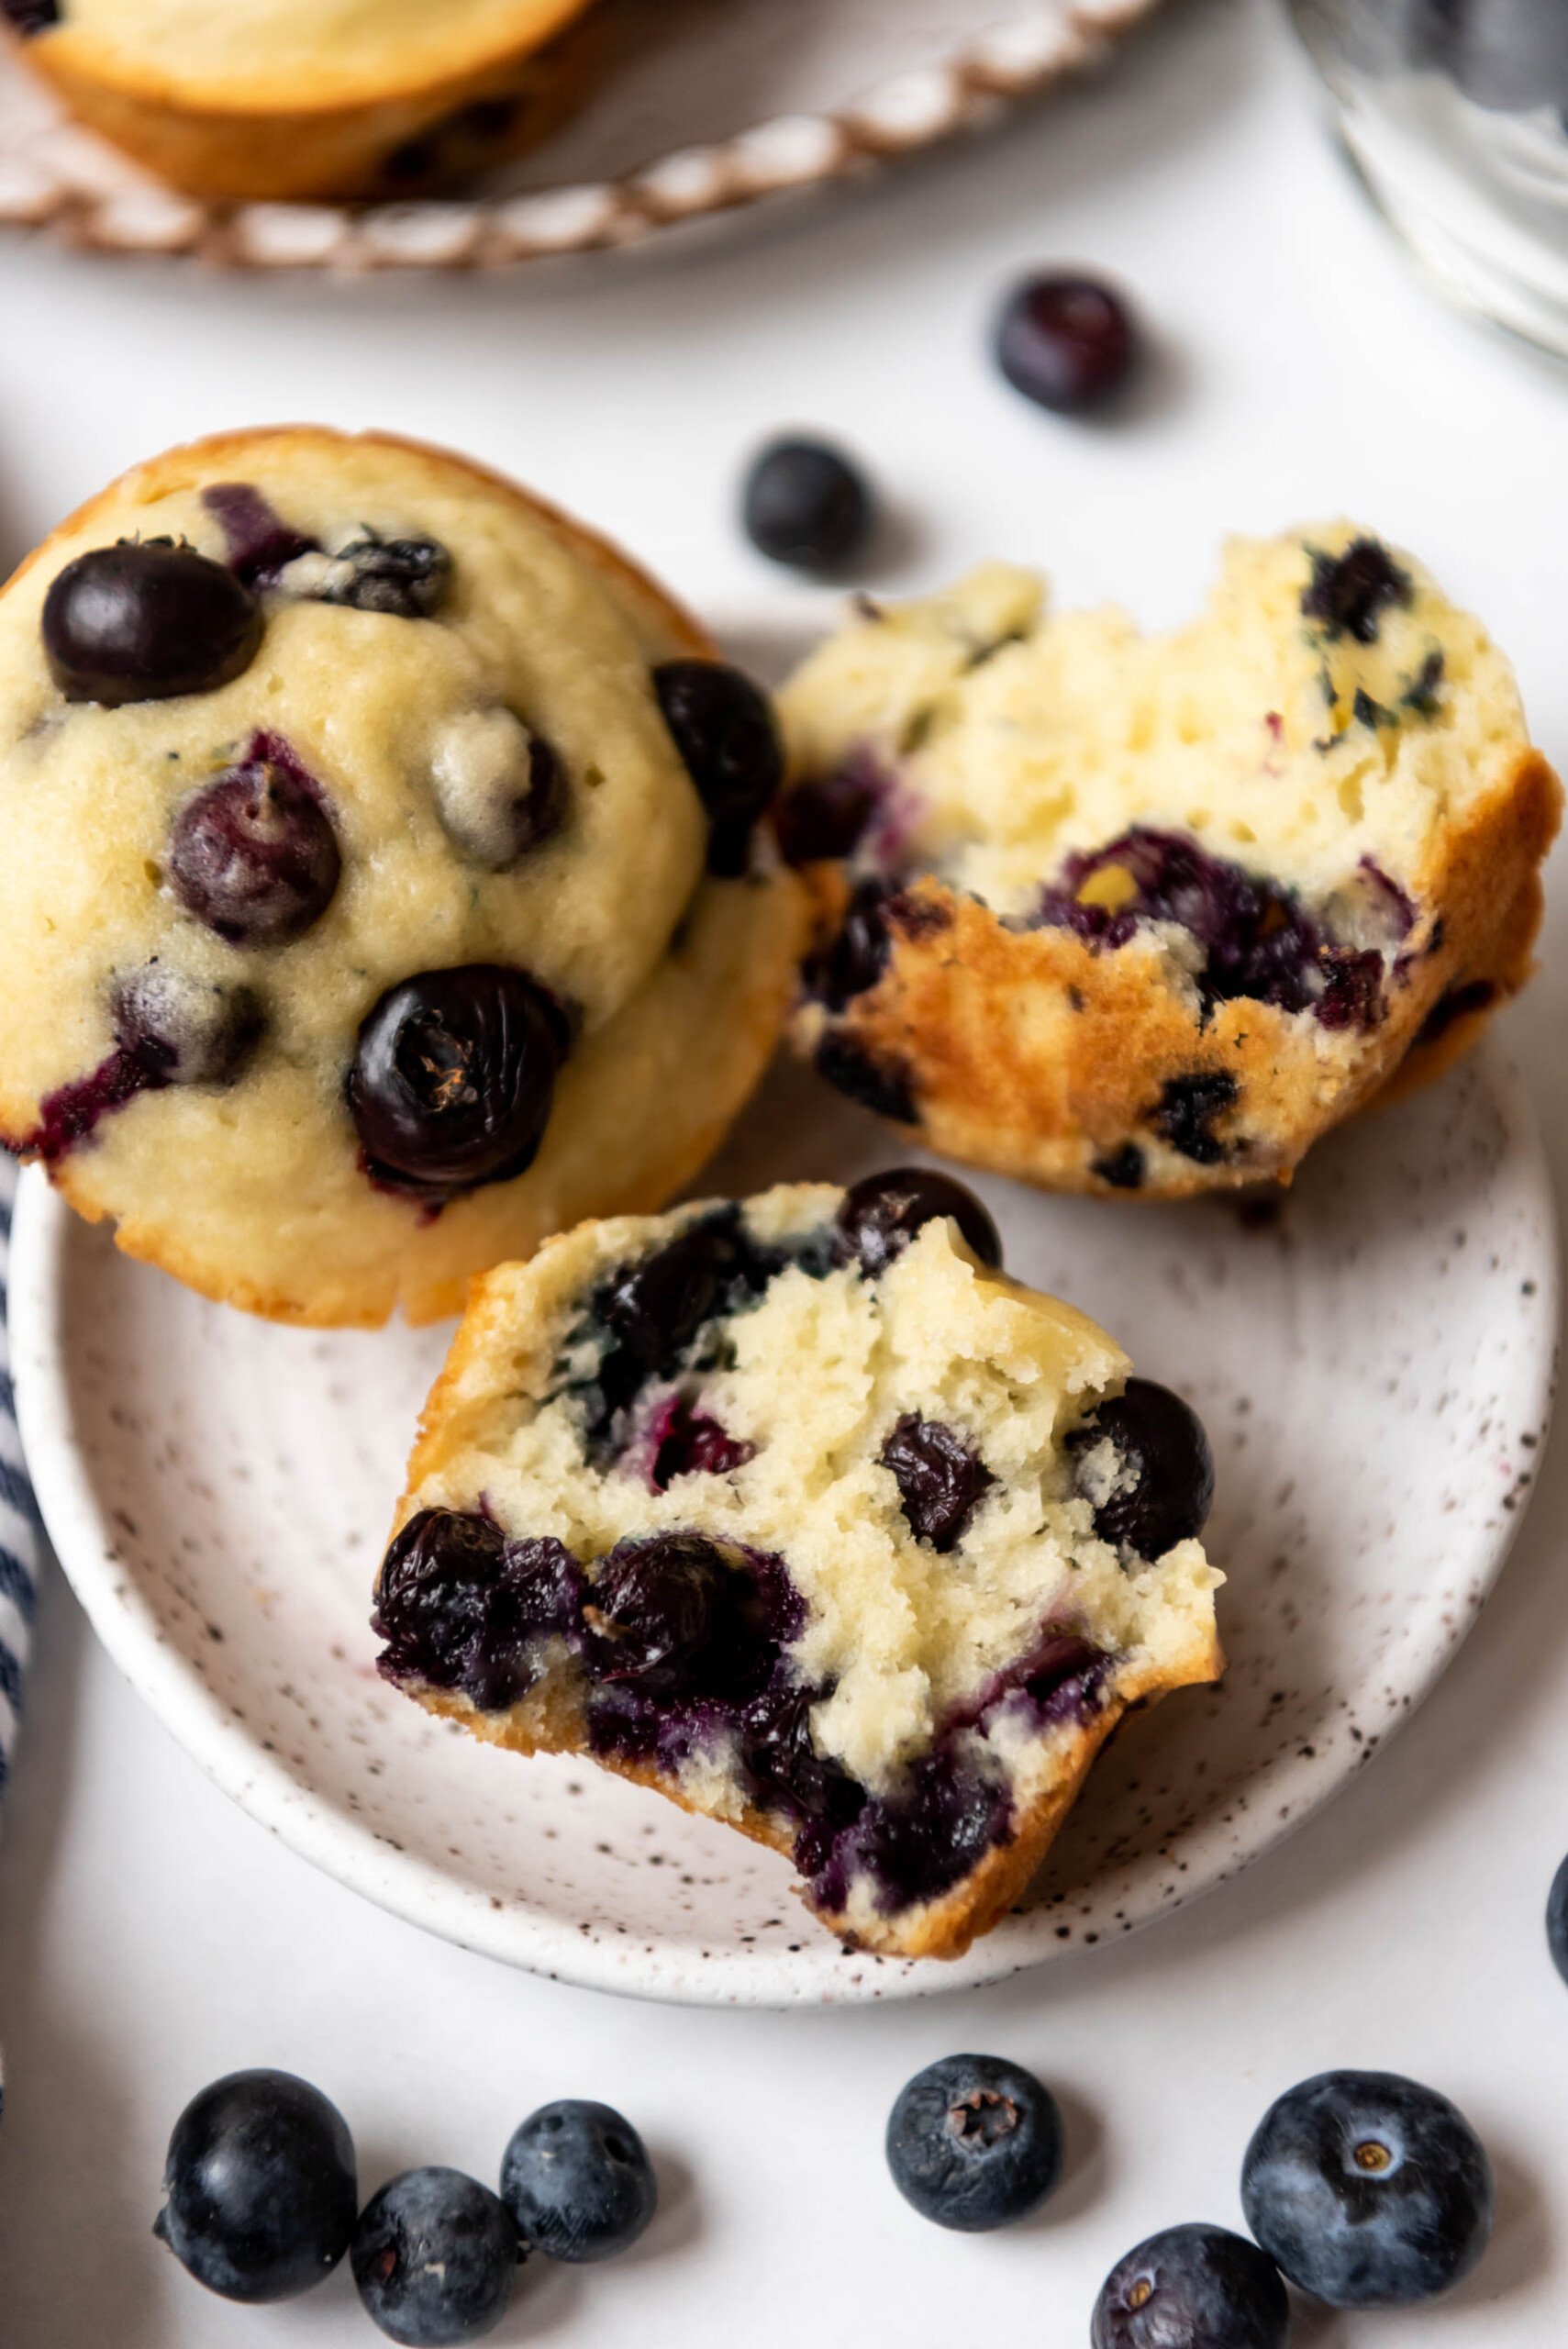 A fresh blueberry muffin torn in half on a plate with another blueberry muffin and fresh blueberries around them.